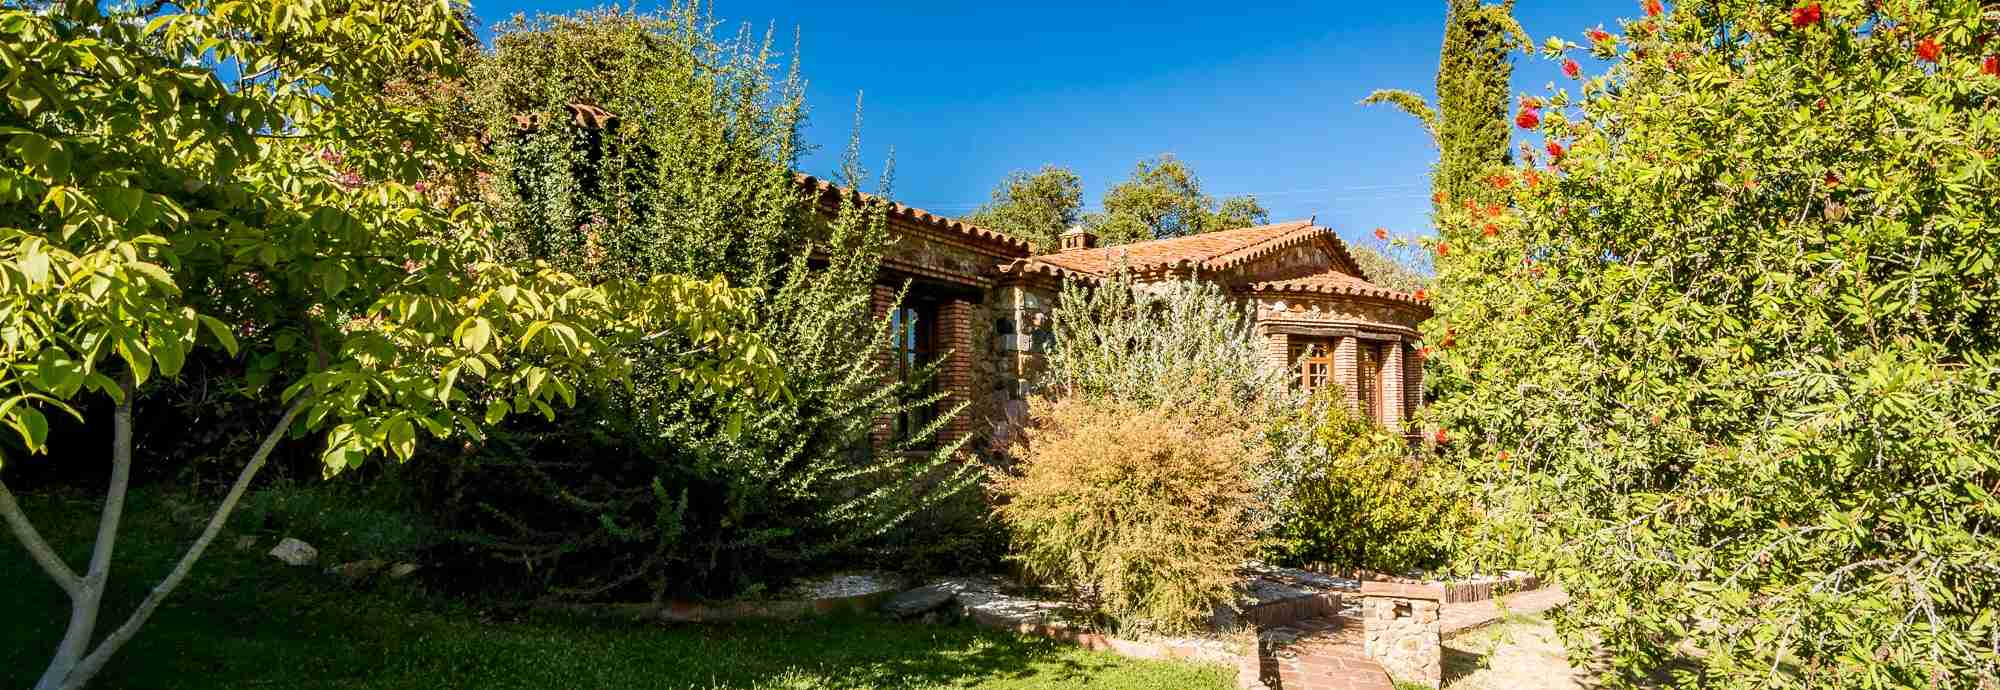 Excellent Andalucia family villa with shared tennis, pool, gardens